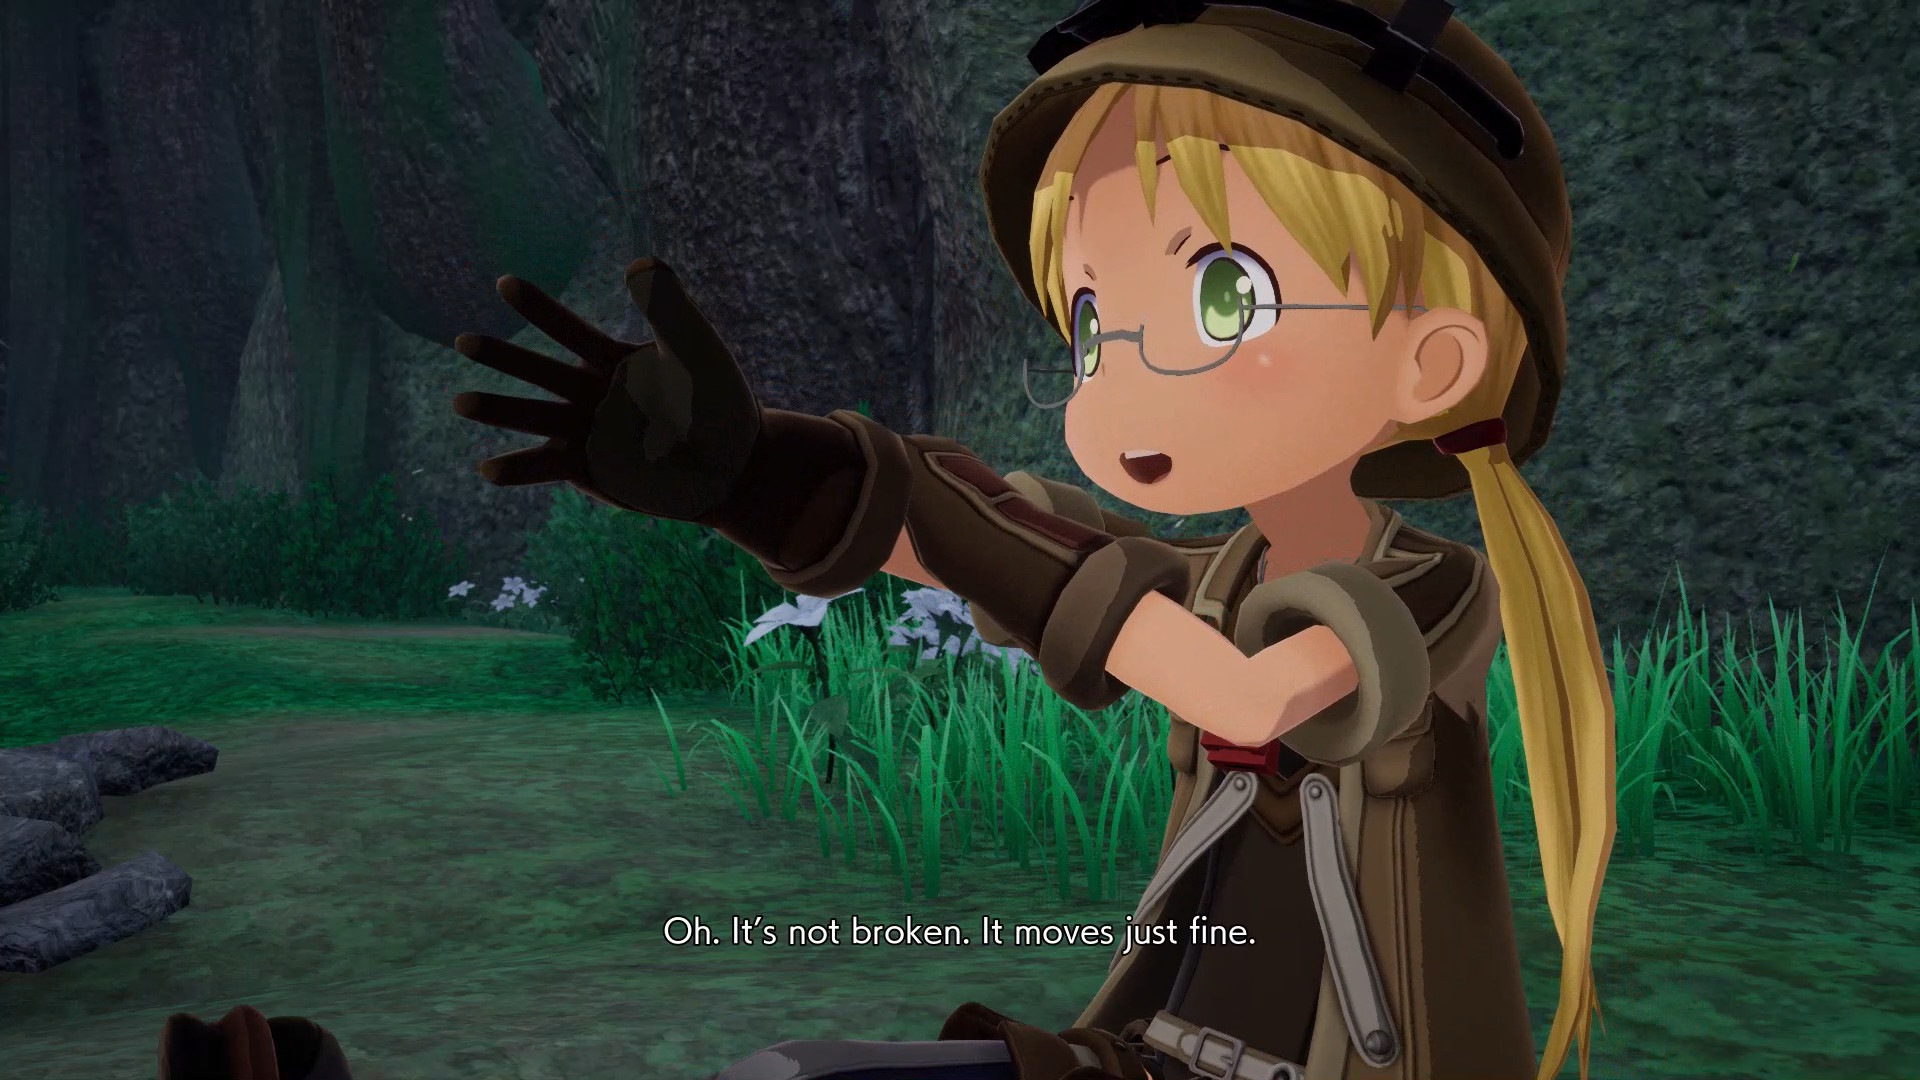 Made In Abyss Season 2 - What We Know So Far